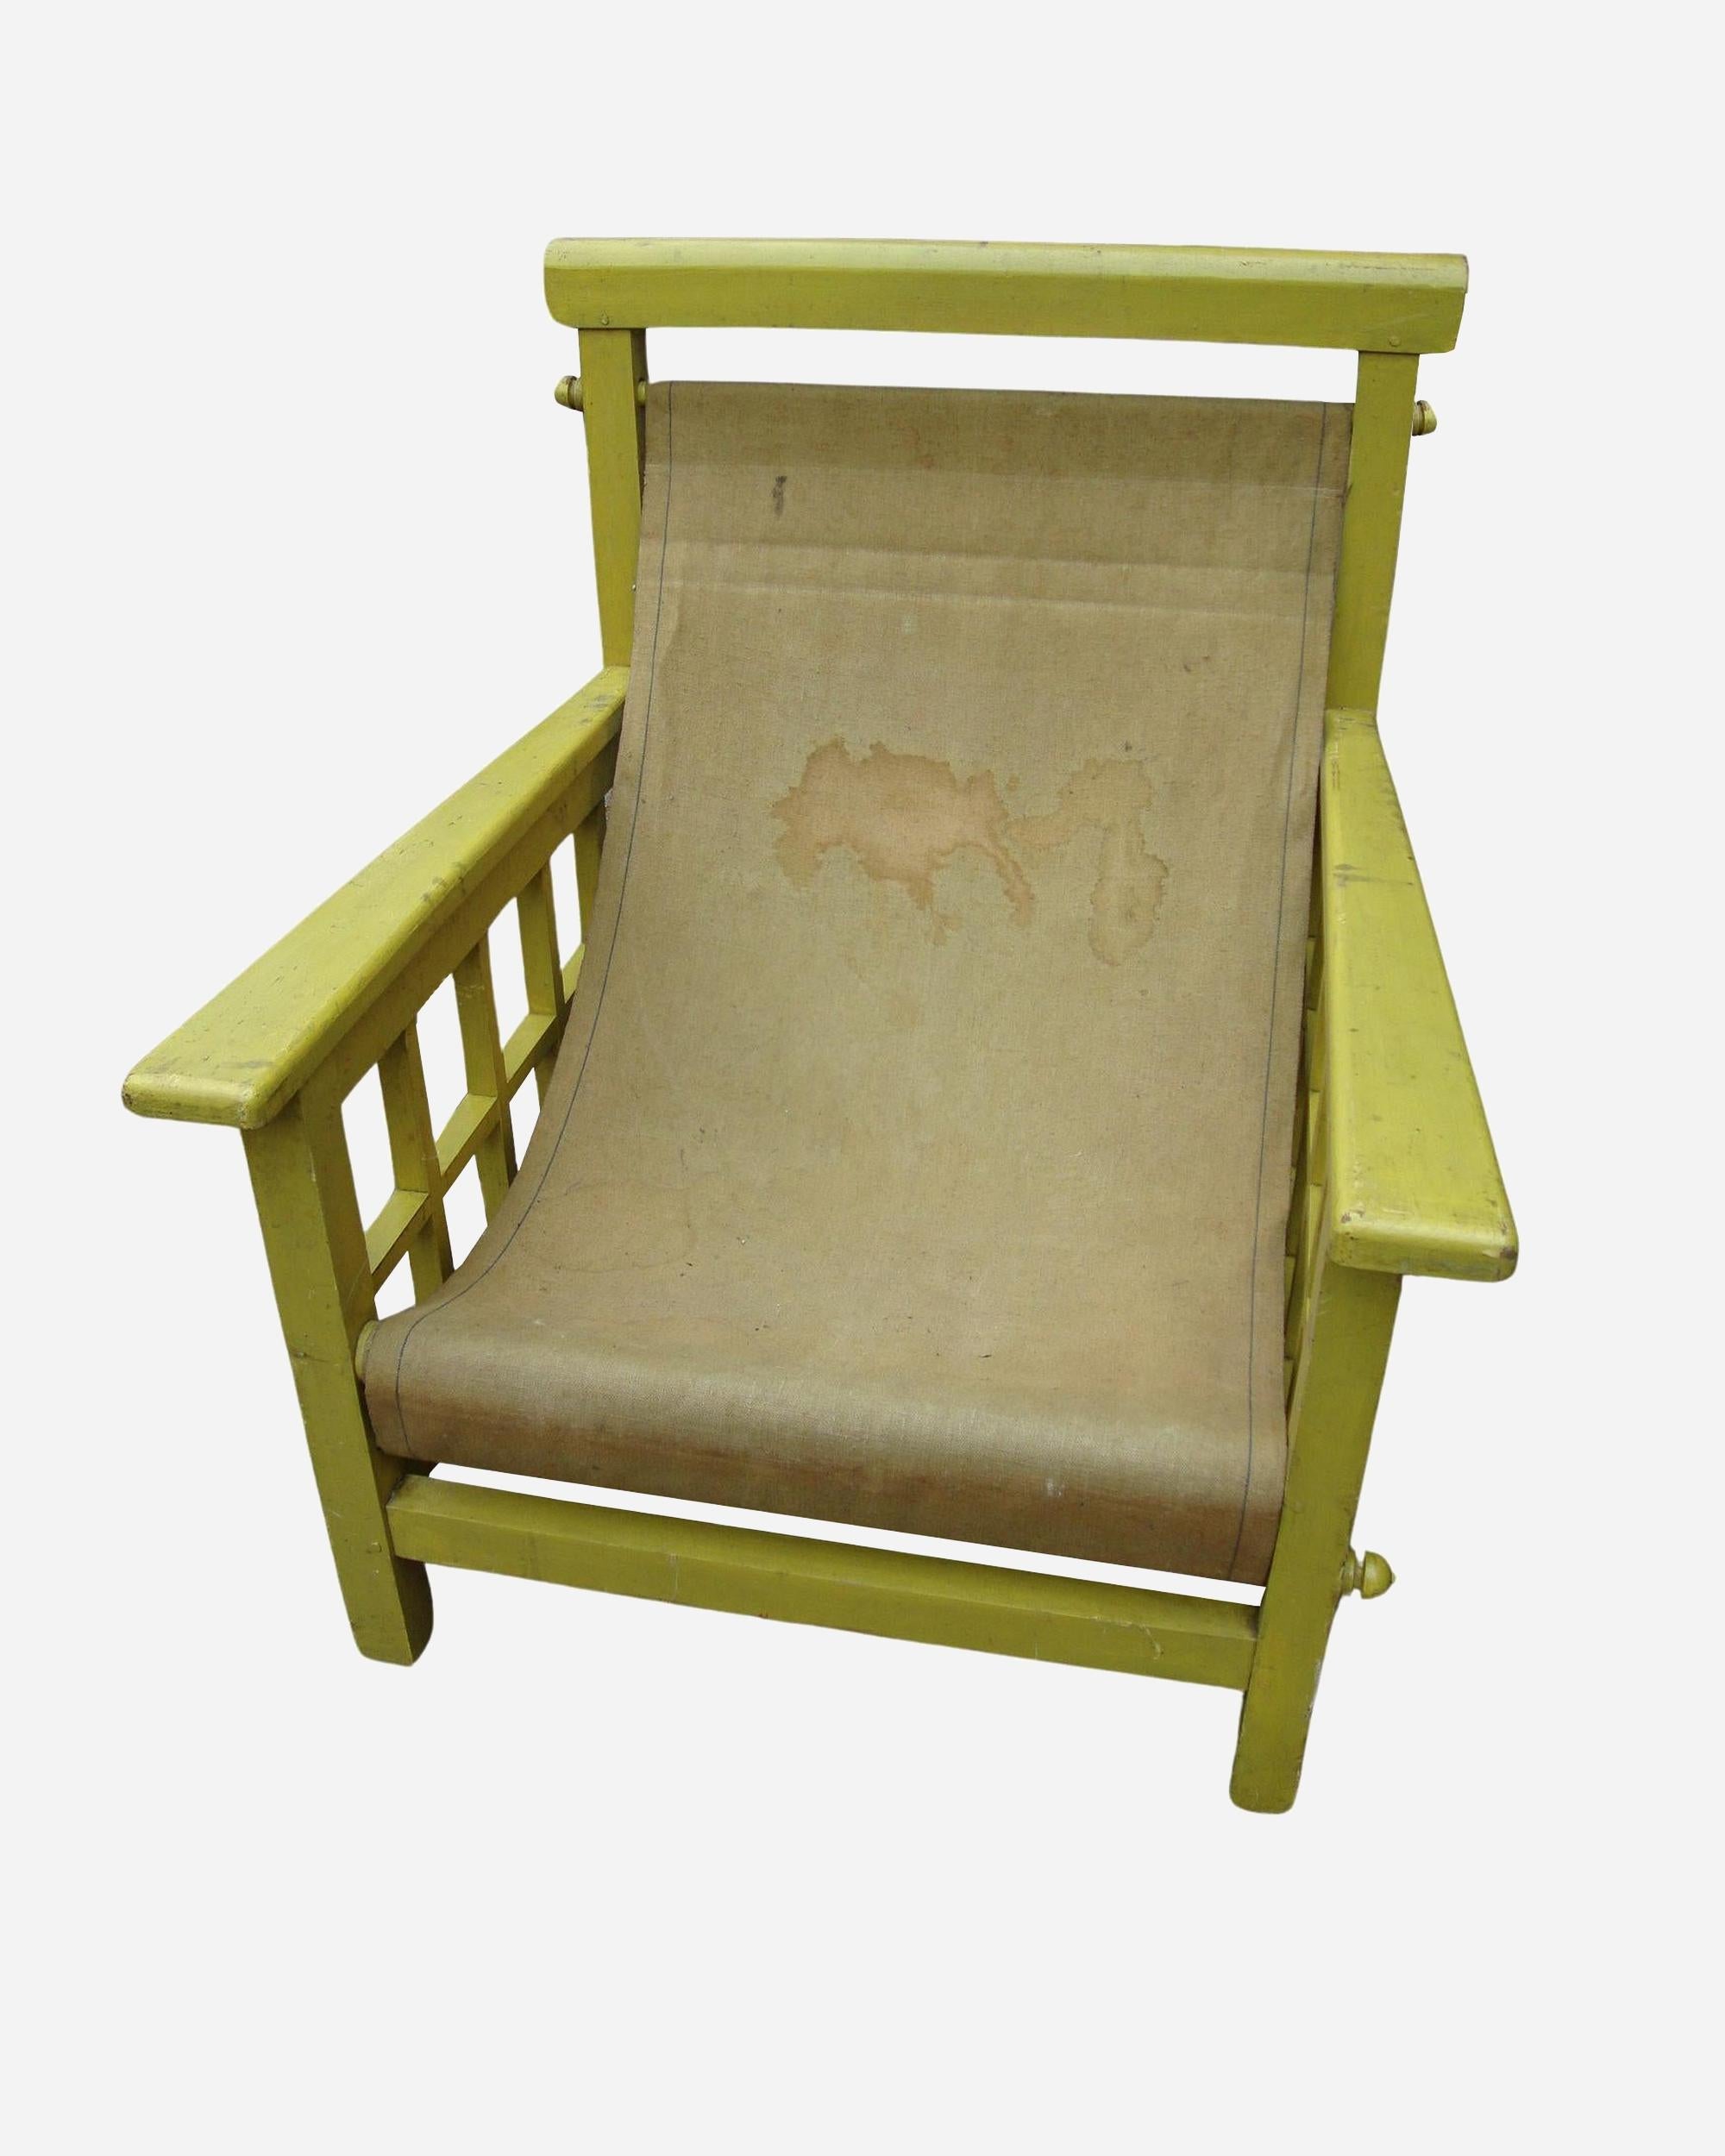 Large transat armchair, model by Robert Mallet-Stevens (1886-1945) edited by Pierre Dariel, circa 1926.
In yellow-painted wood, side jambs with openwork squares, armrests with overhanging cuff, back and seat in beige voile fabric.